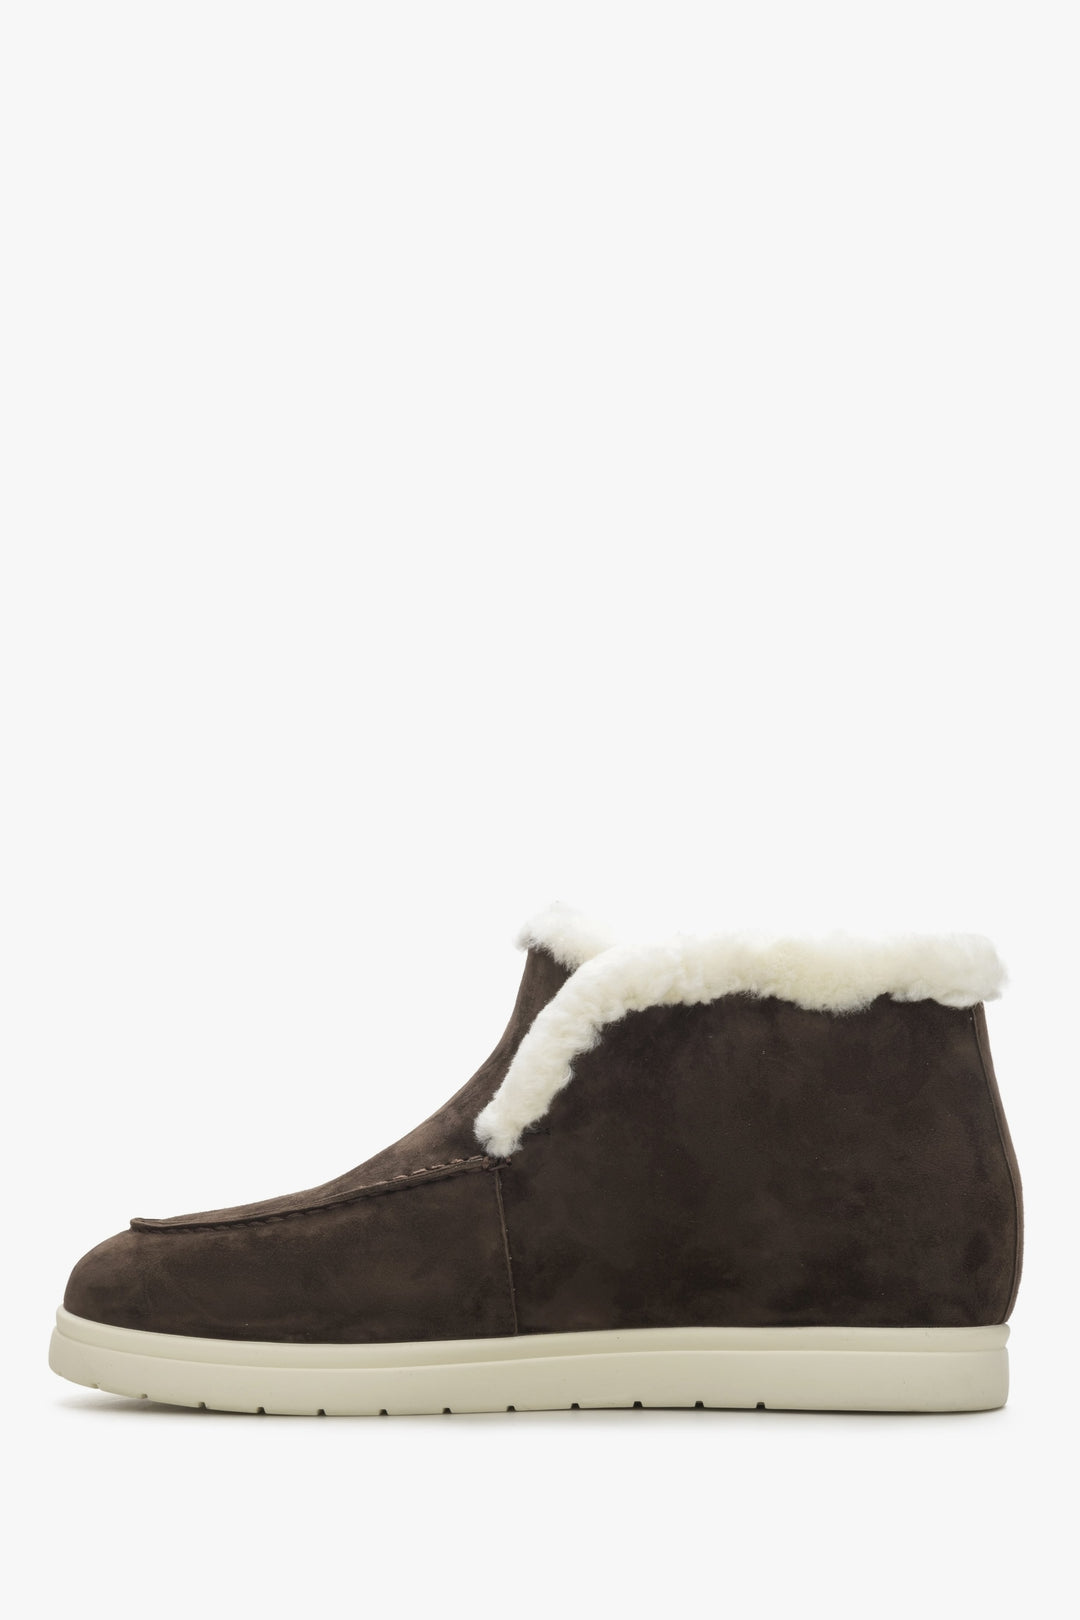 Women's low-top boots made of velour and fur in saddle brown colour Estro - shoe profile.